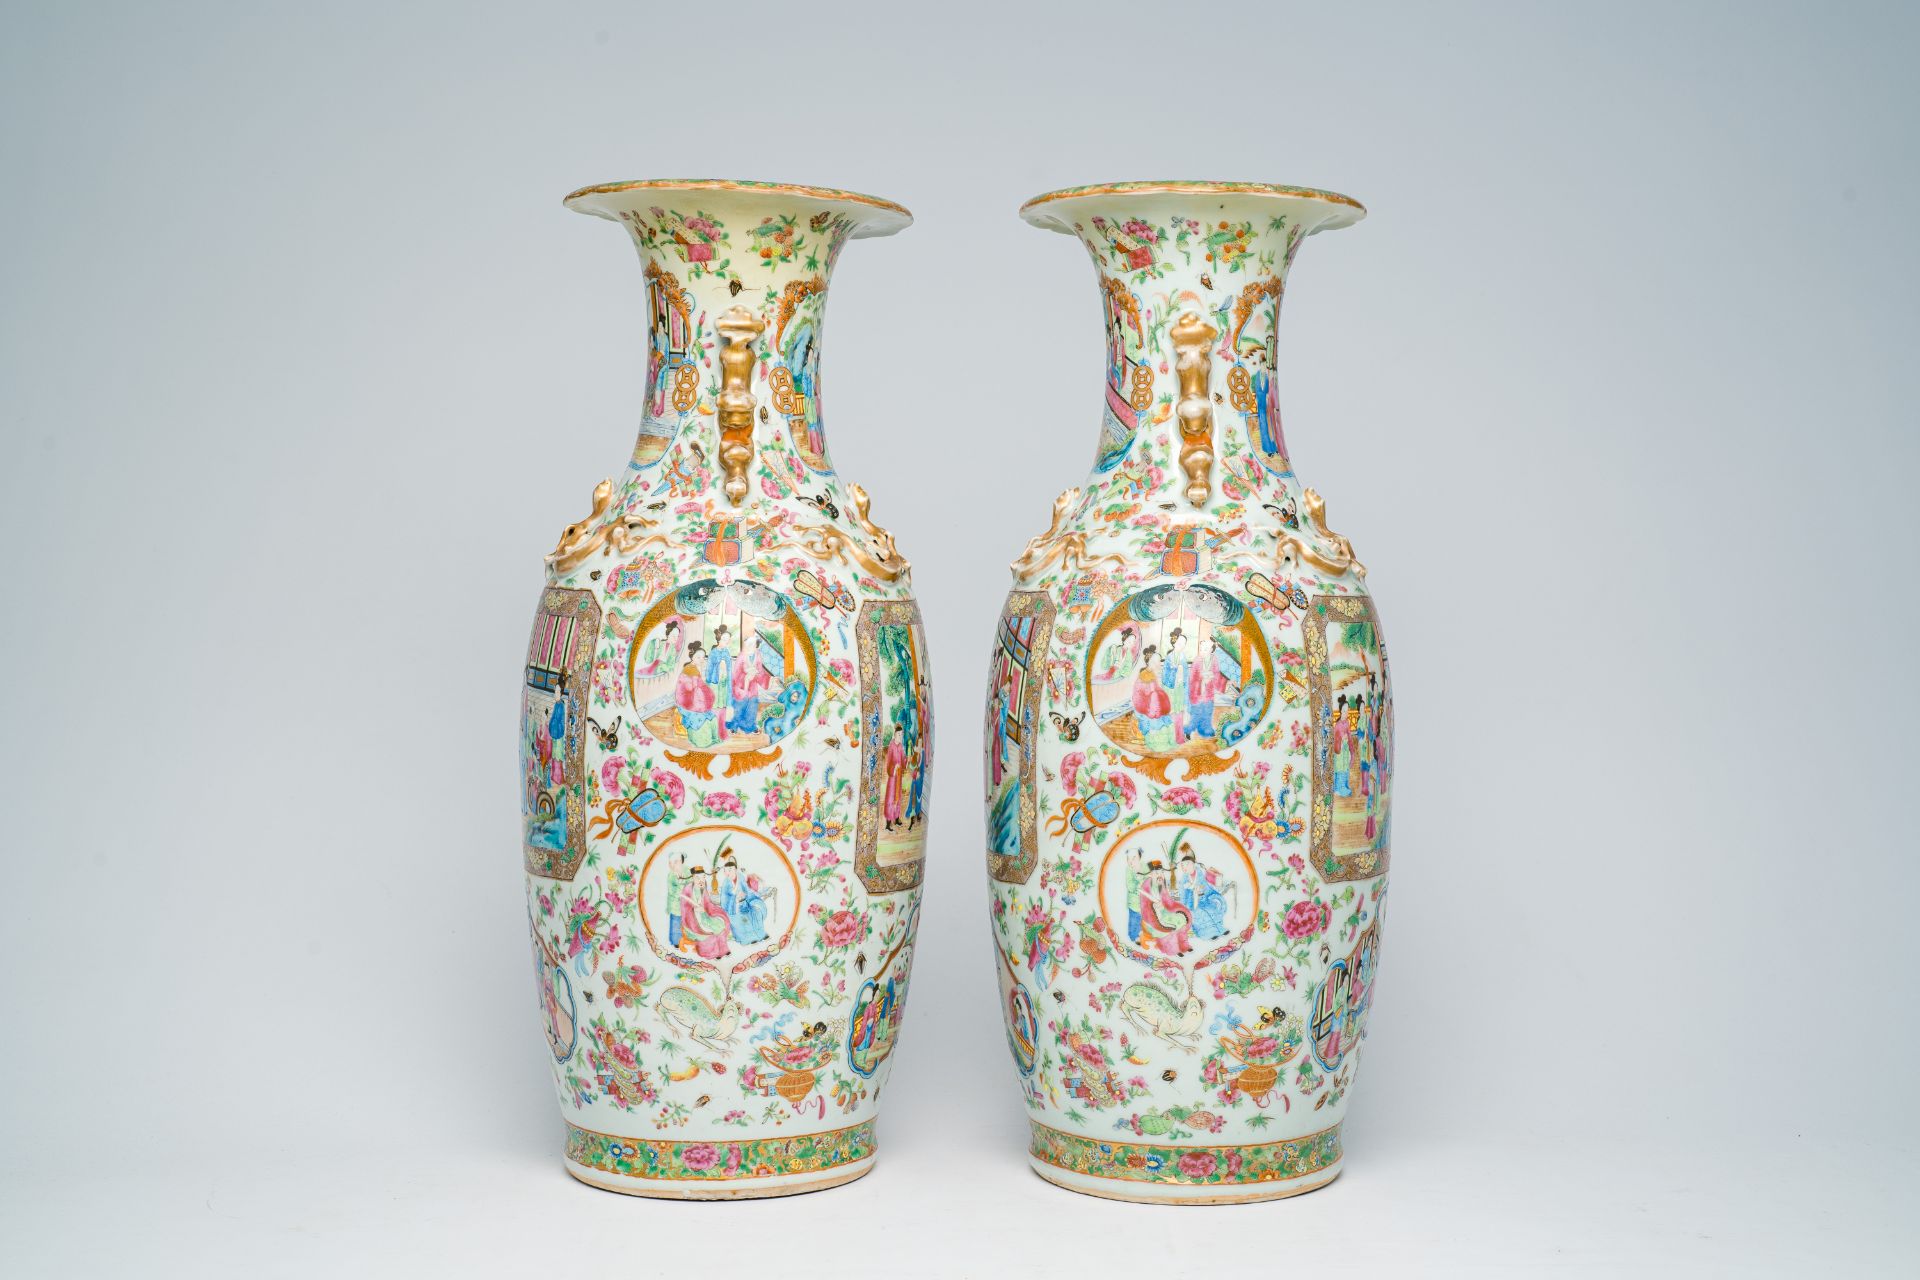 A pair of Chinese Canton famille rose vases with palace scenes and floral design, 19th C. - Image 4 of 7